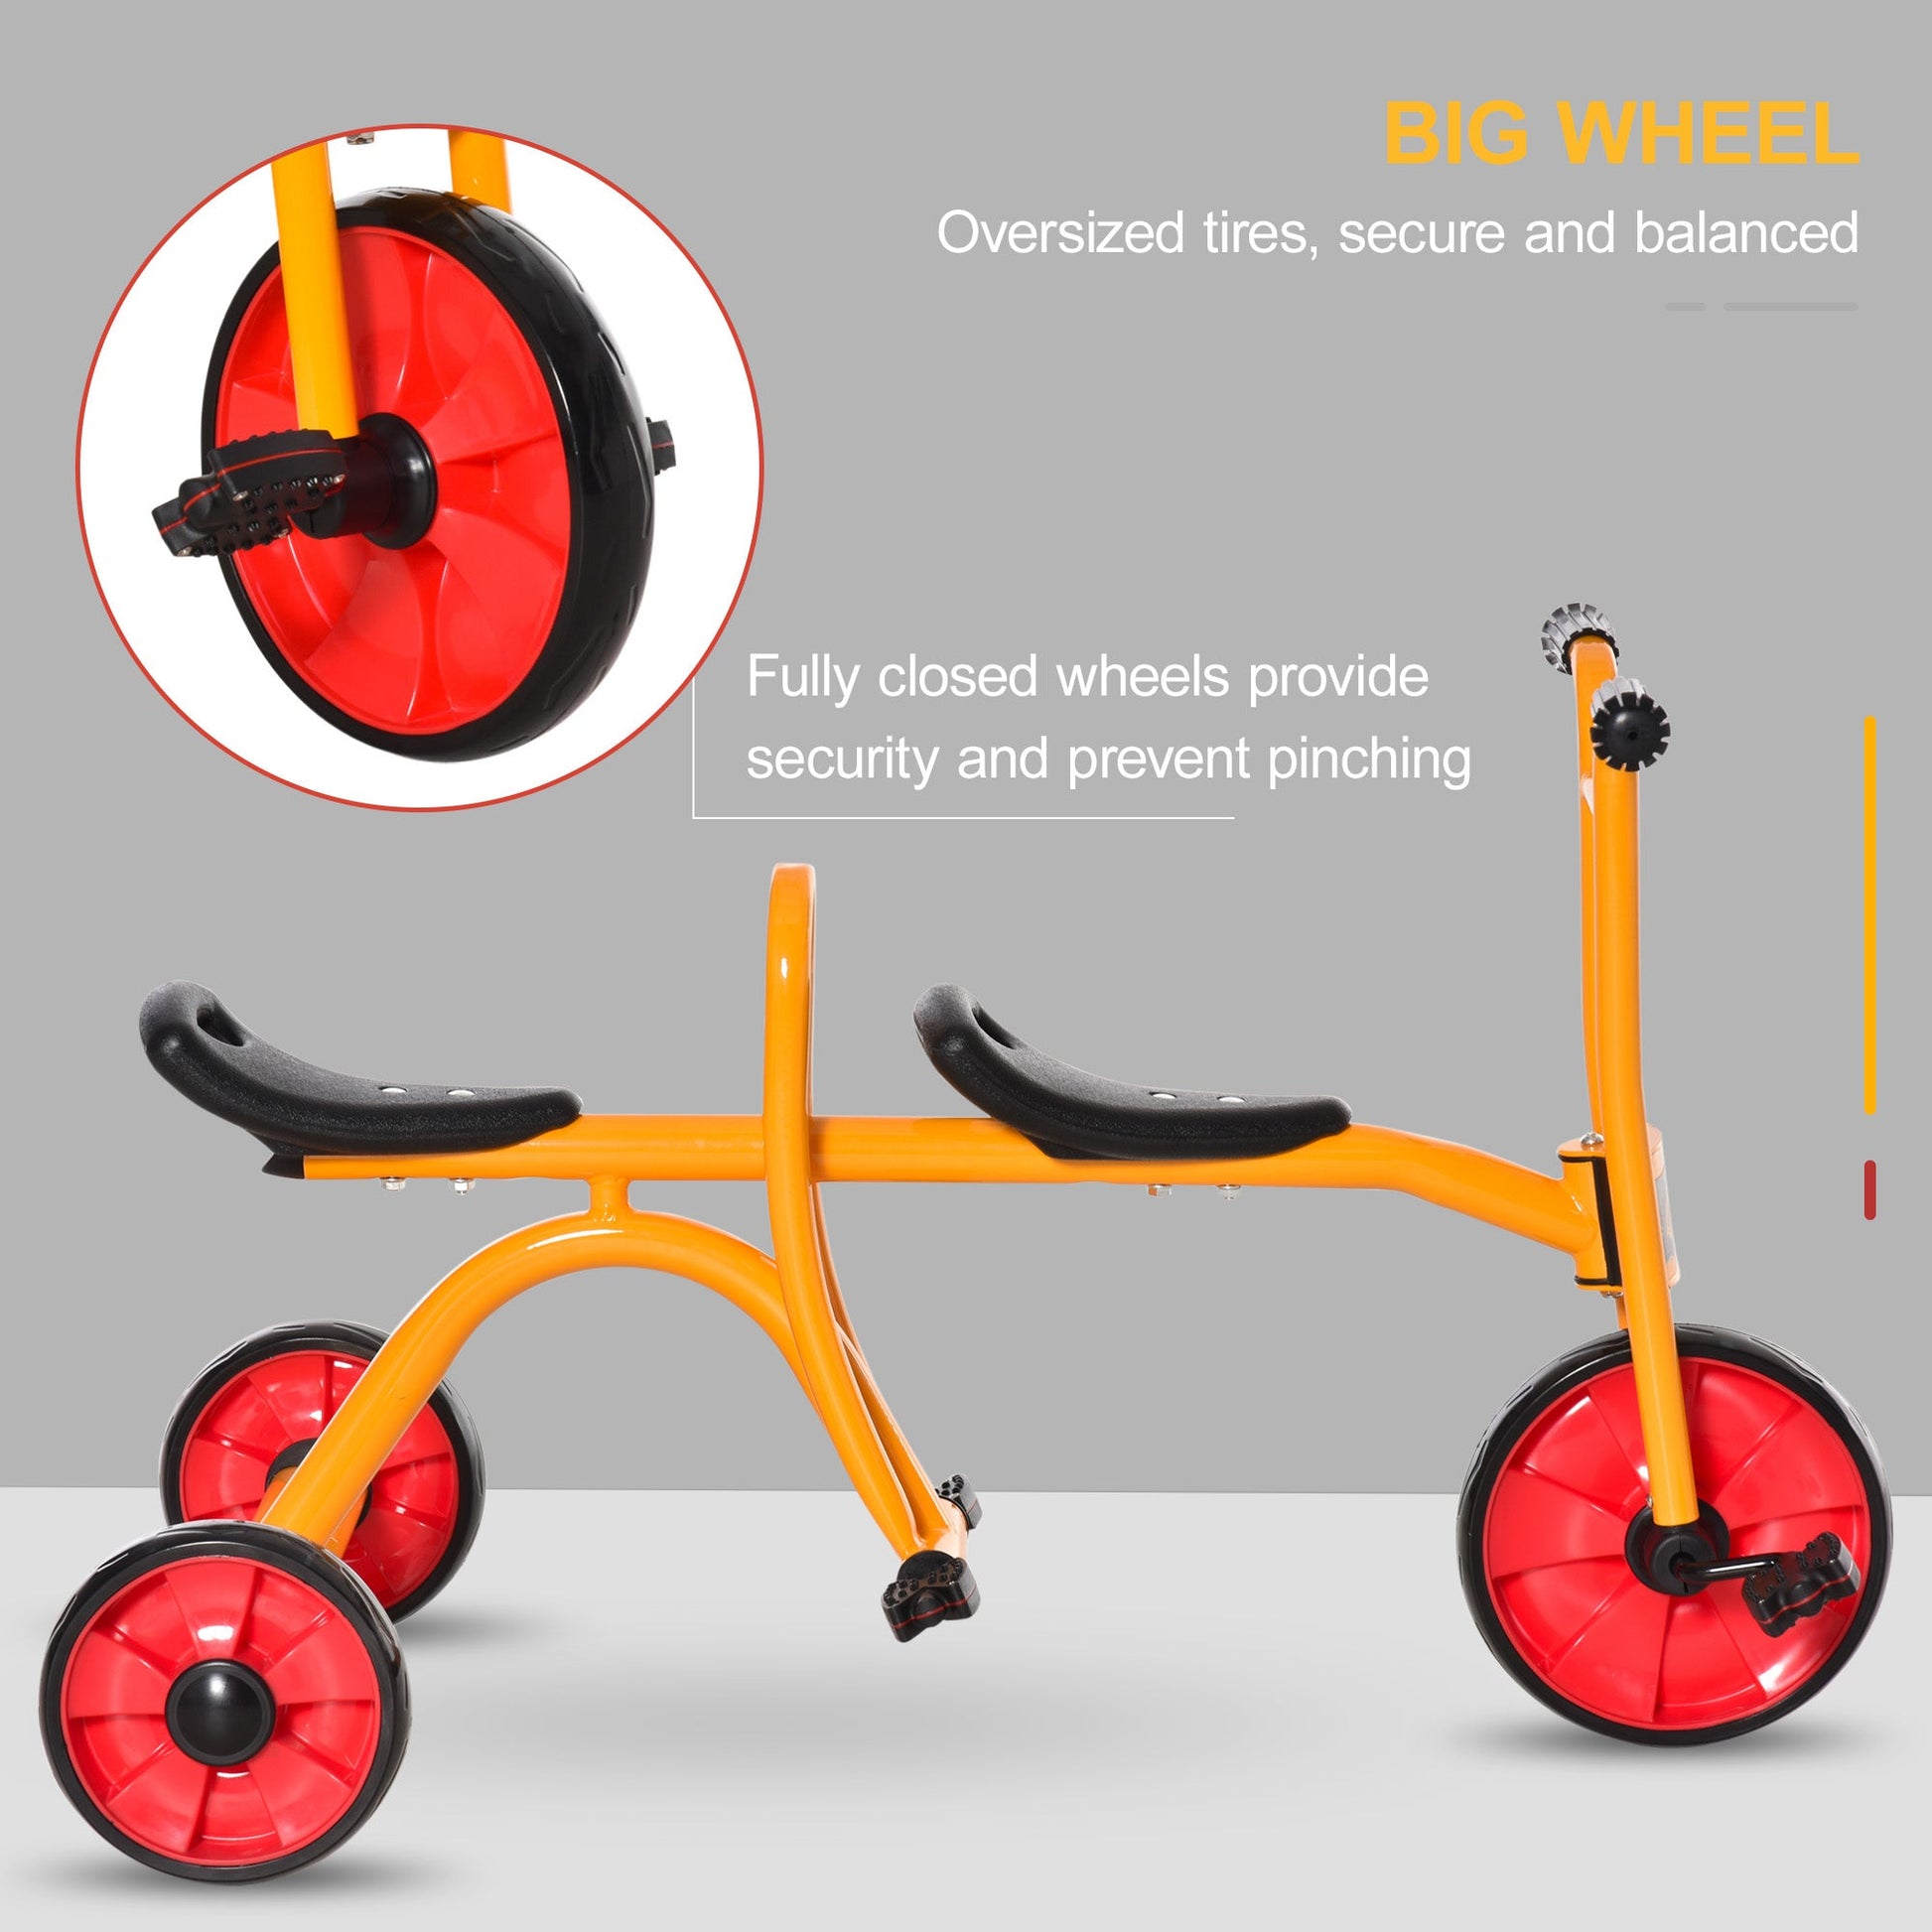 Kids Tandem Tricycle 3 Wheels Toddler Bike Trike Baby Boys Girls w/ Double Seats Outdoor &; Indoor for 3-5 Years Old Yellow - Gallery Canada